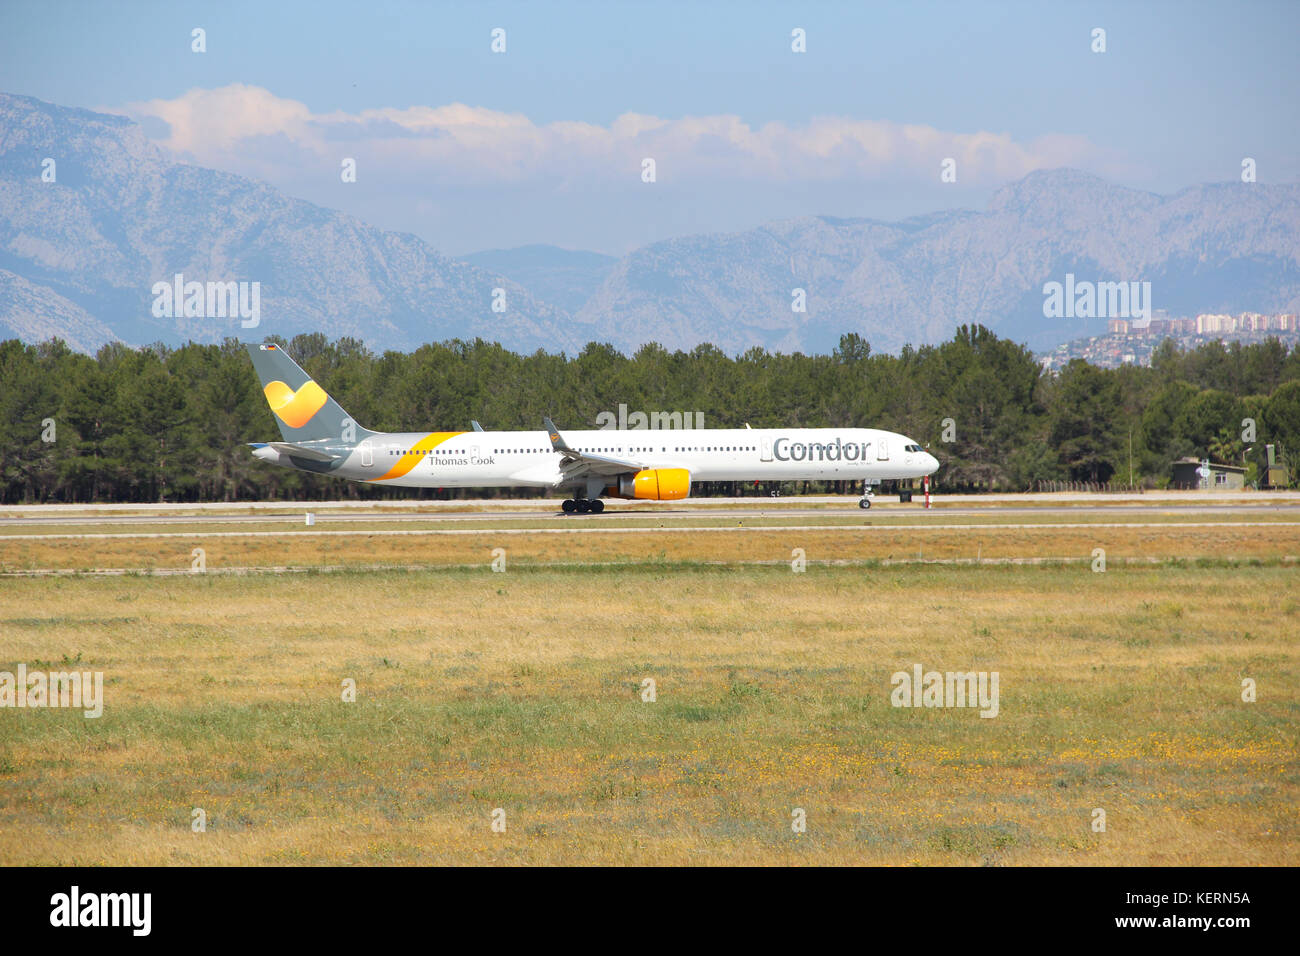 The Boeing 757-300 company Concord Thomas cook takes off at the airport, amid the fields, forests and mountains, spring-summer, Sunny weather Stock Photo